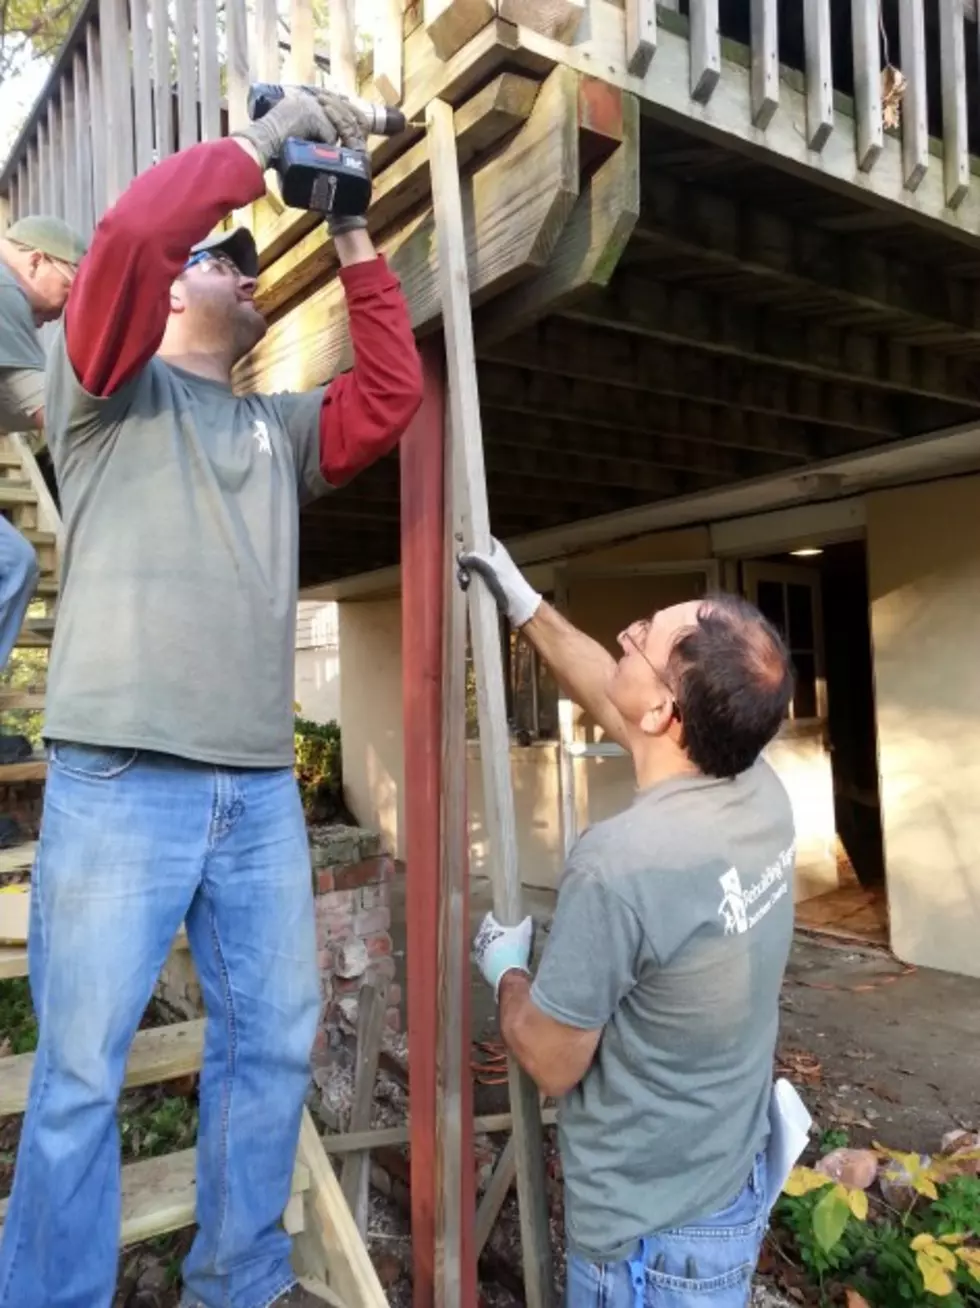 Rebuilding Together: Fall Rebuilding Day, Operation Remodel, and More